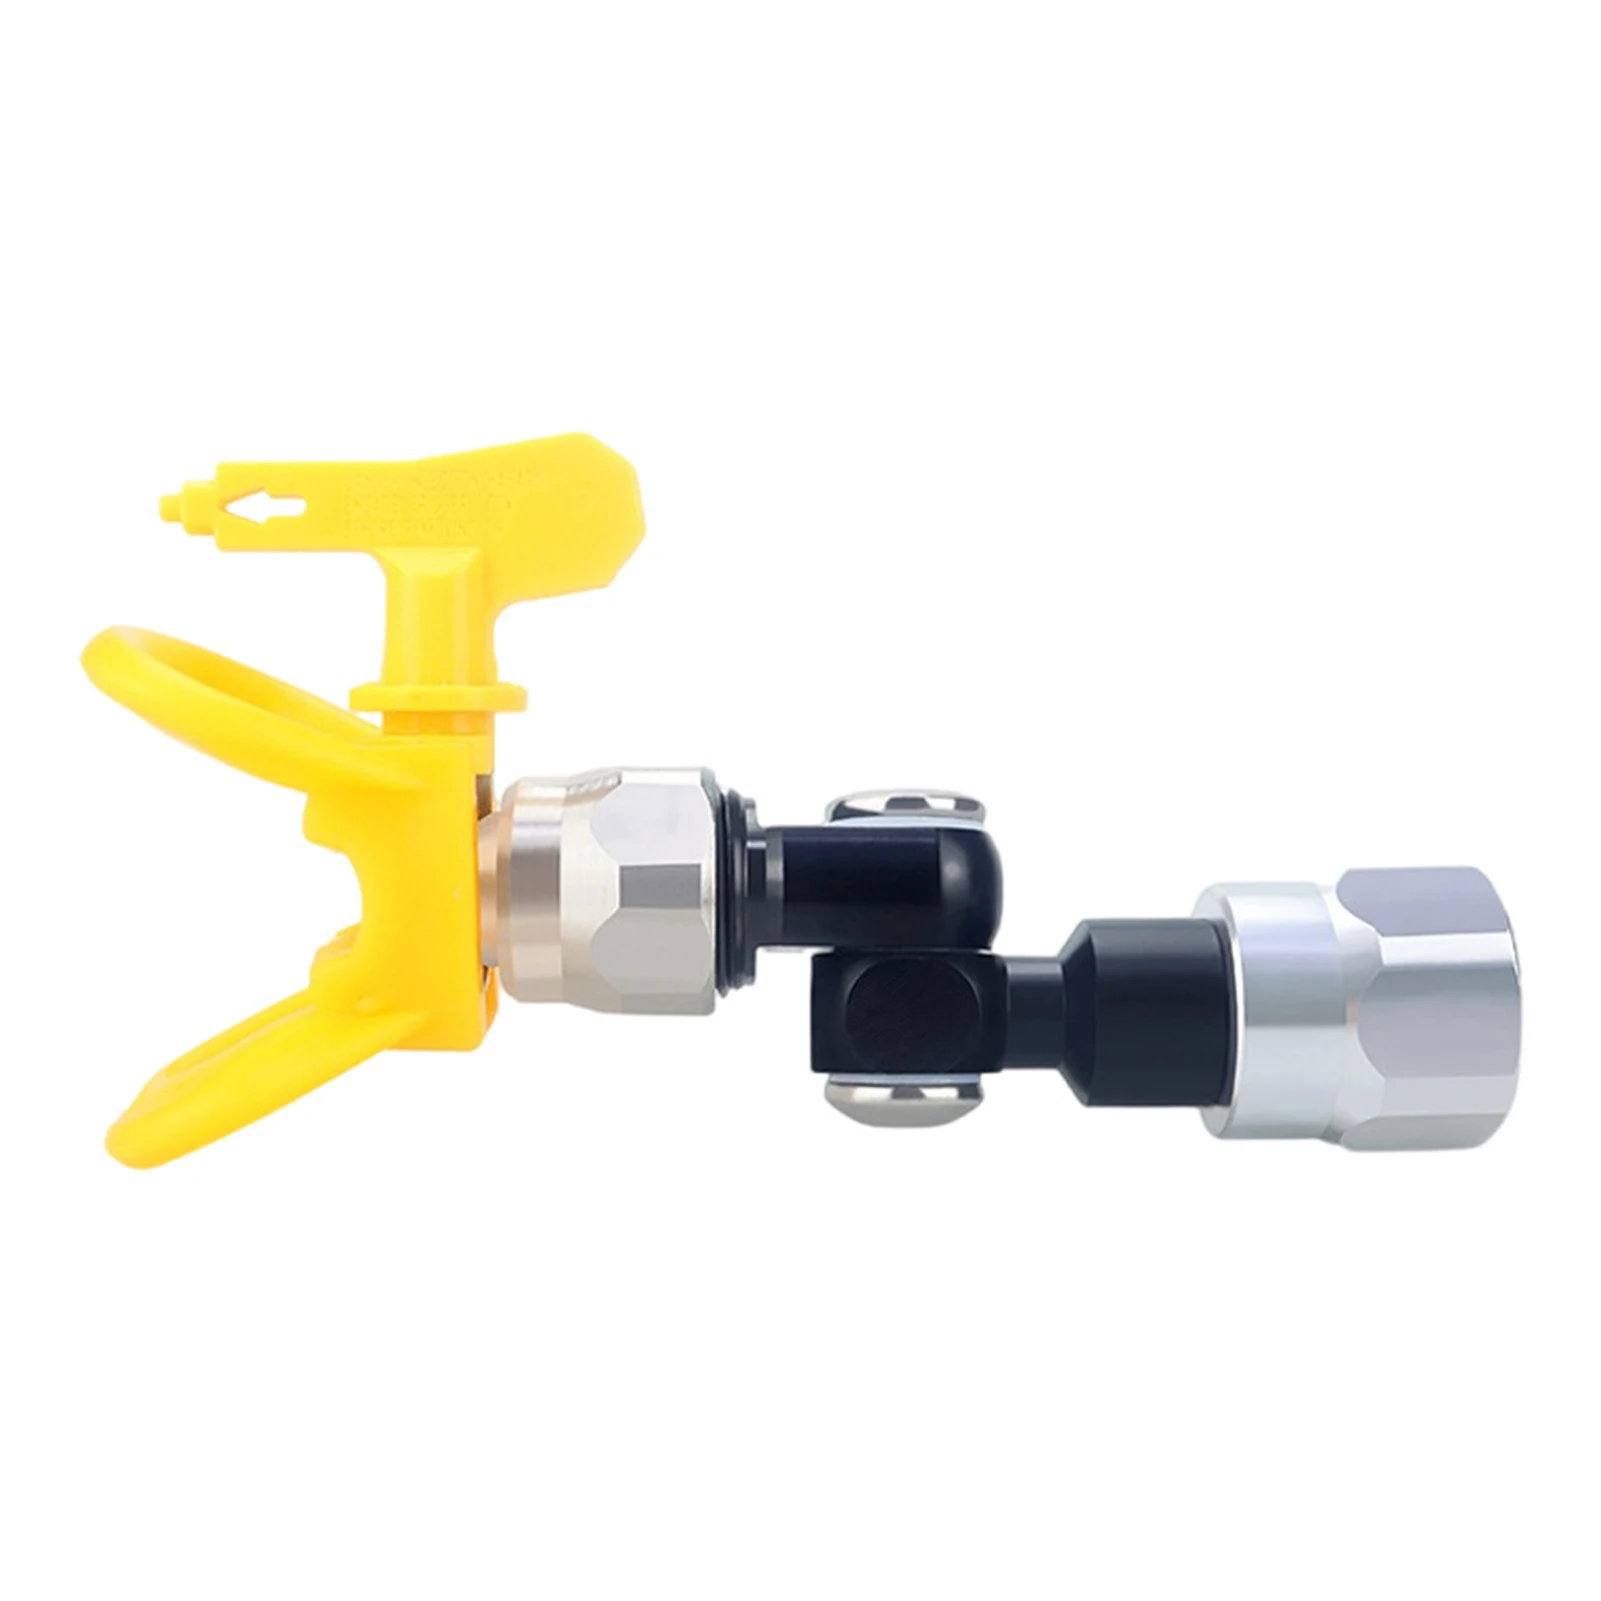 

Adapter Airless Sprayer Alloy Efficient Easy To Install Connector With Sealing Gasket Rotary Flexible Universal Joint